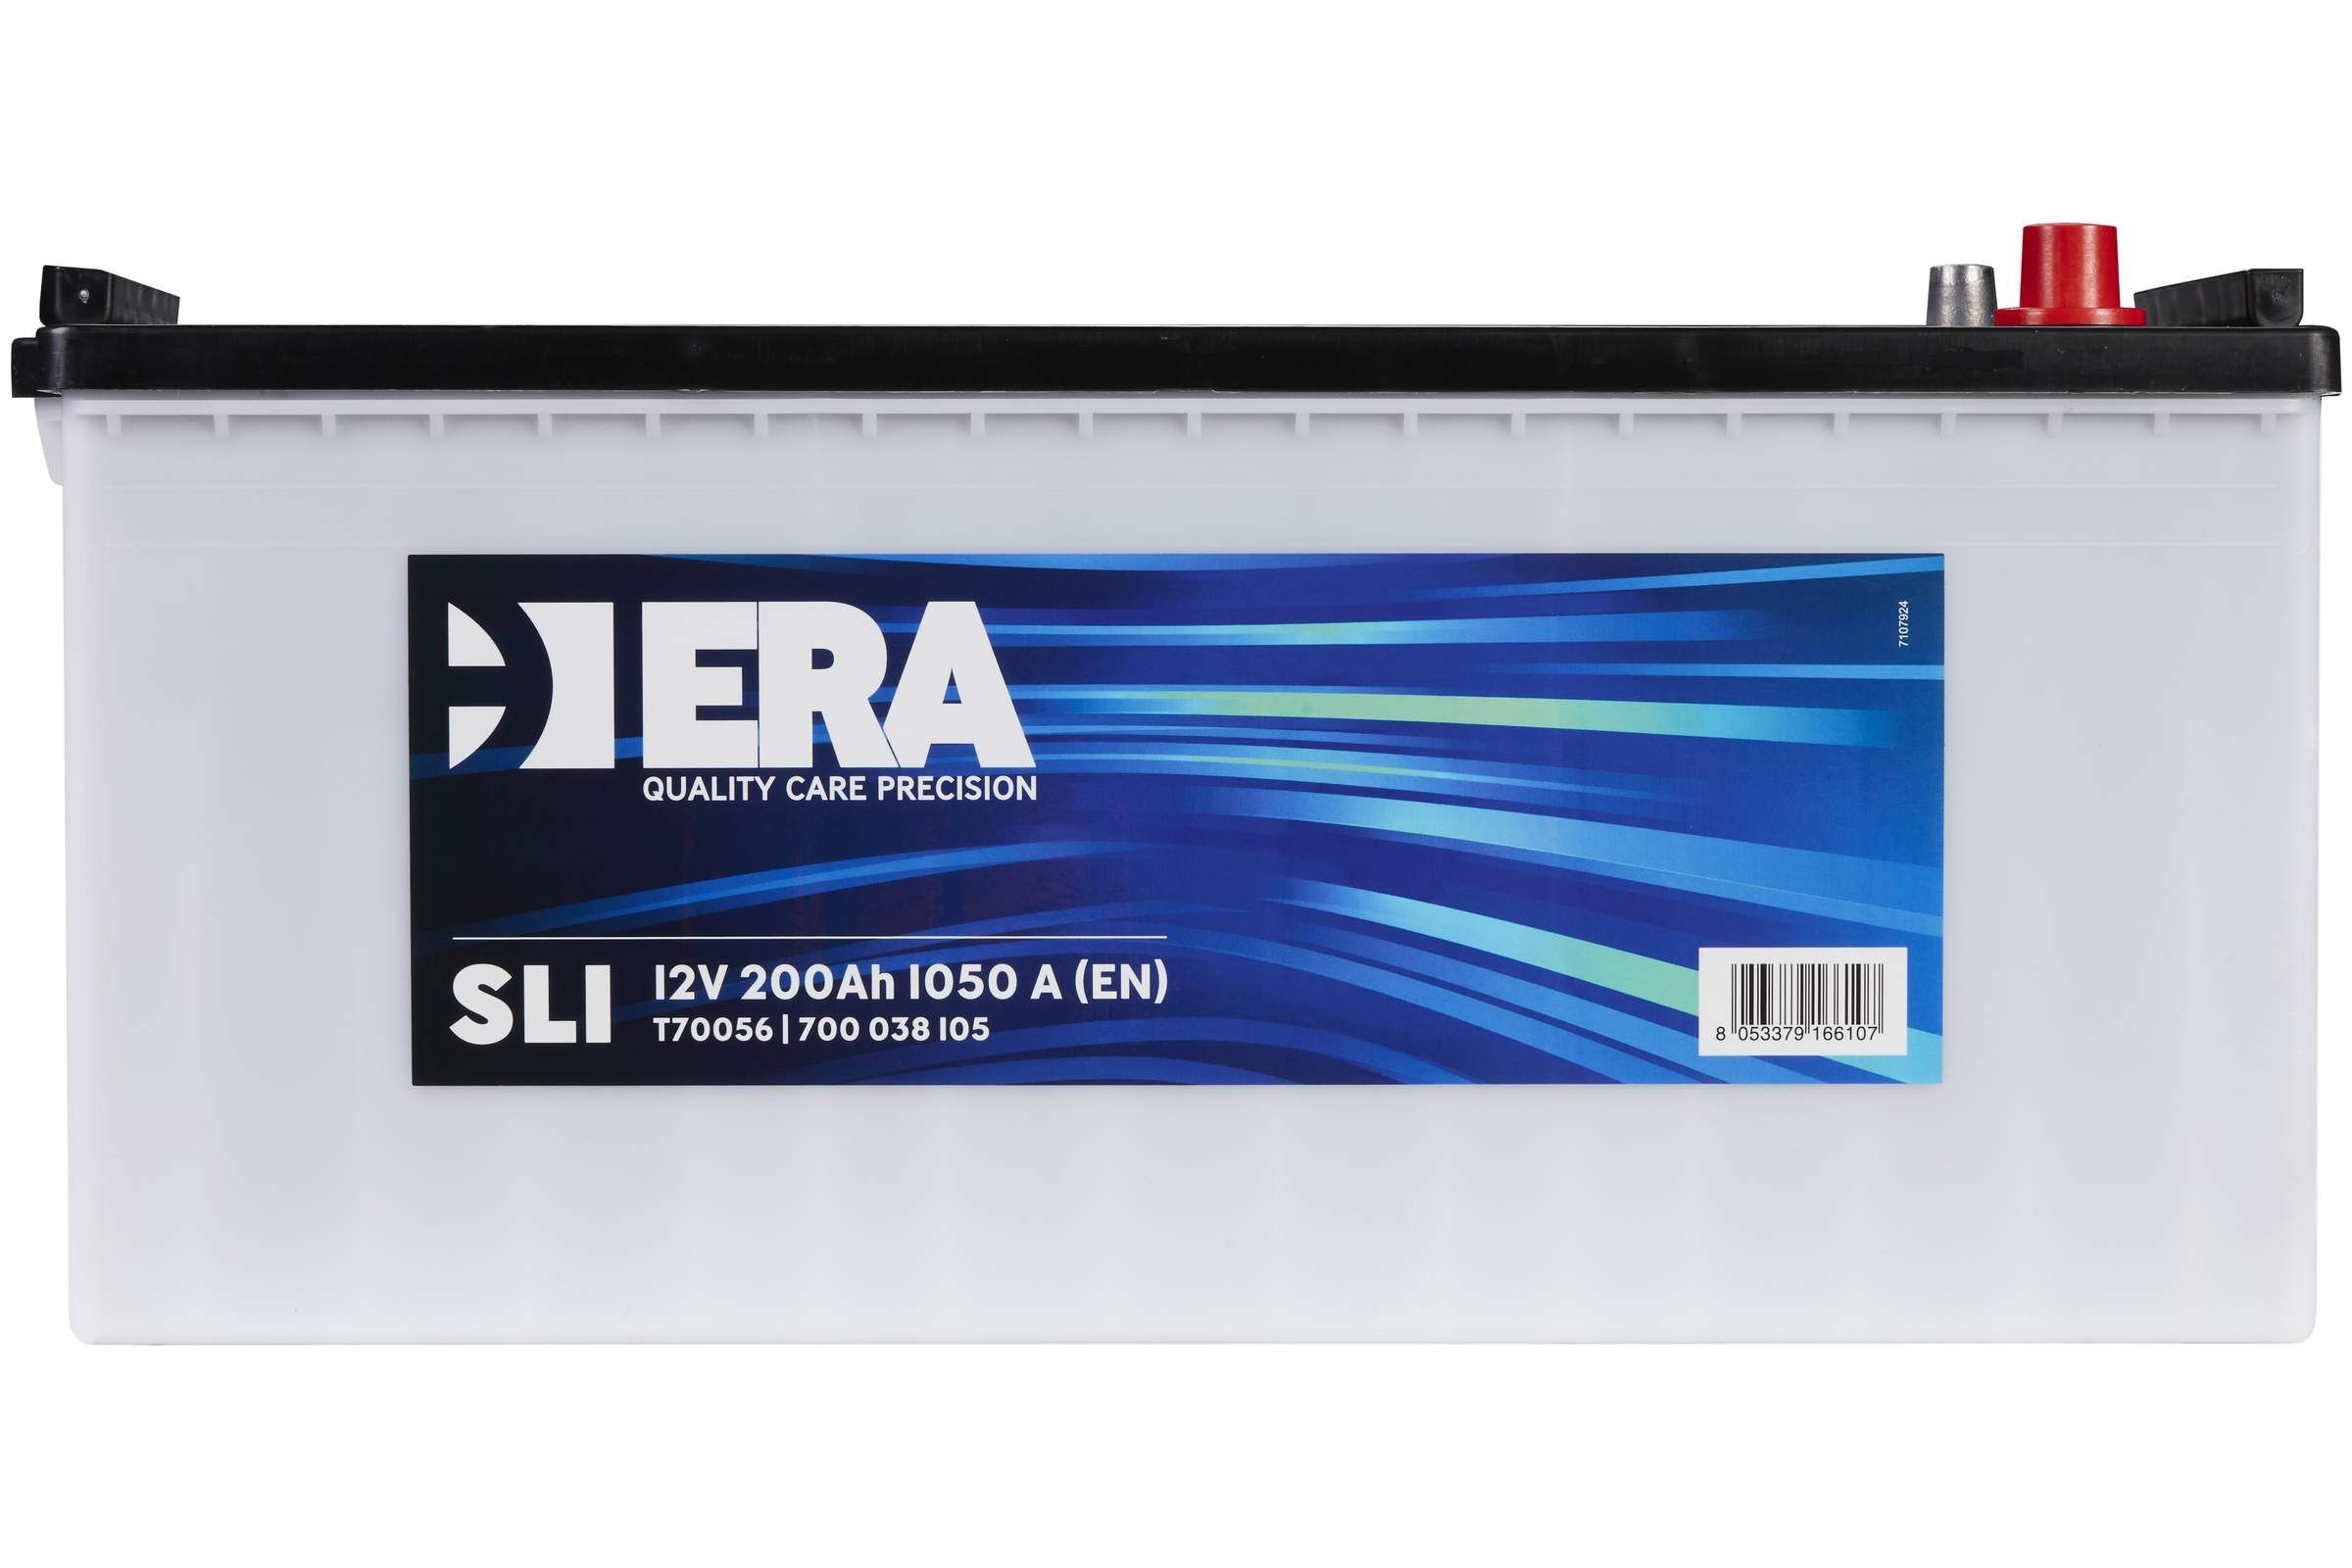 T70056 Stop start battery ERA 700038105 review and test